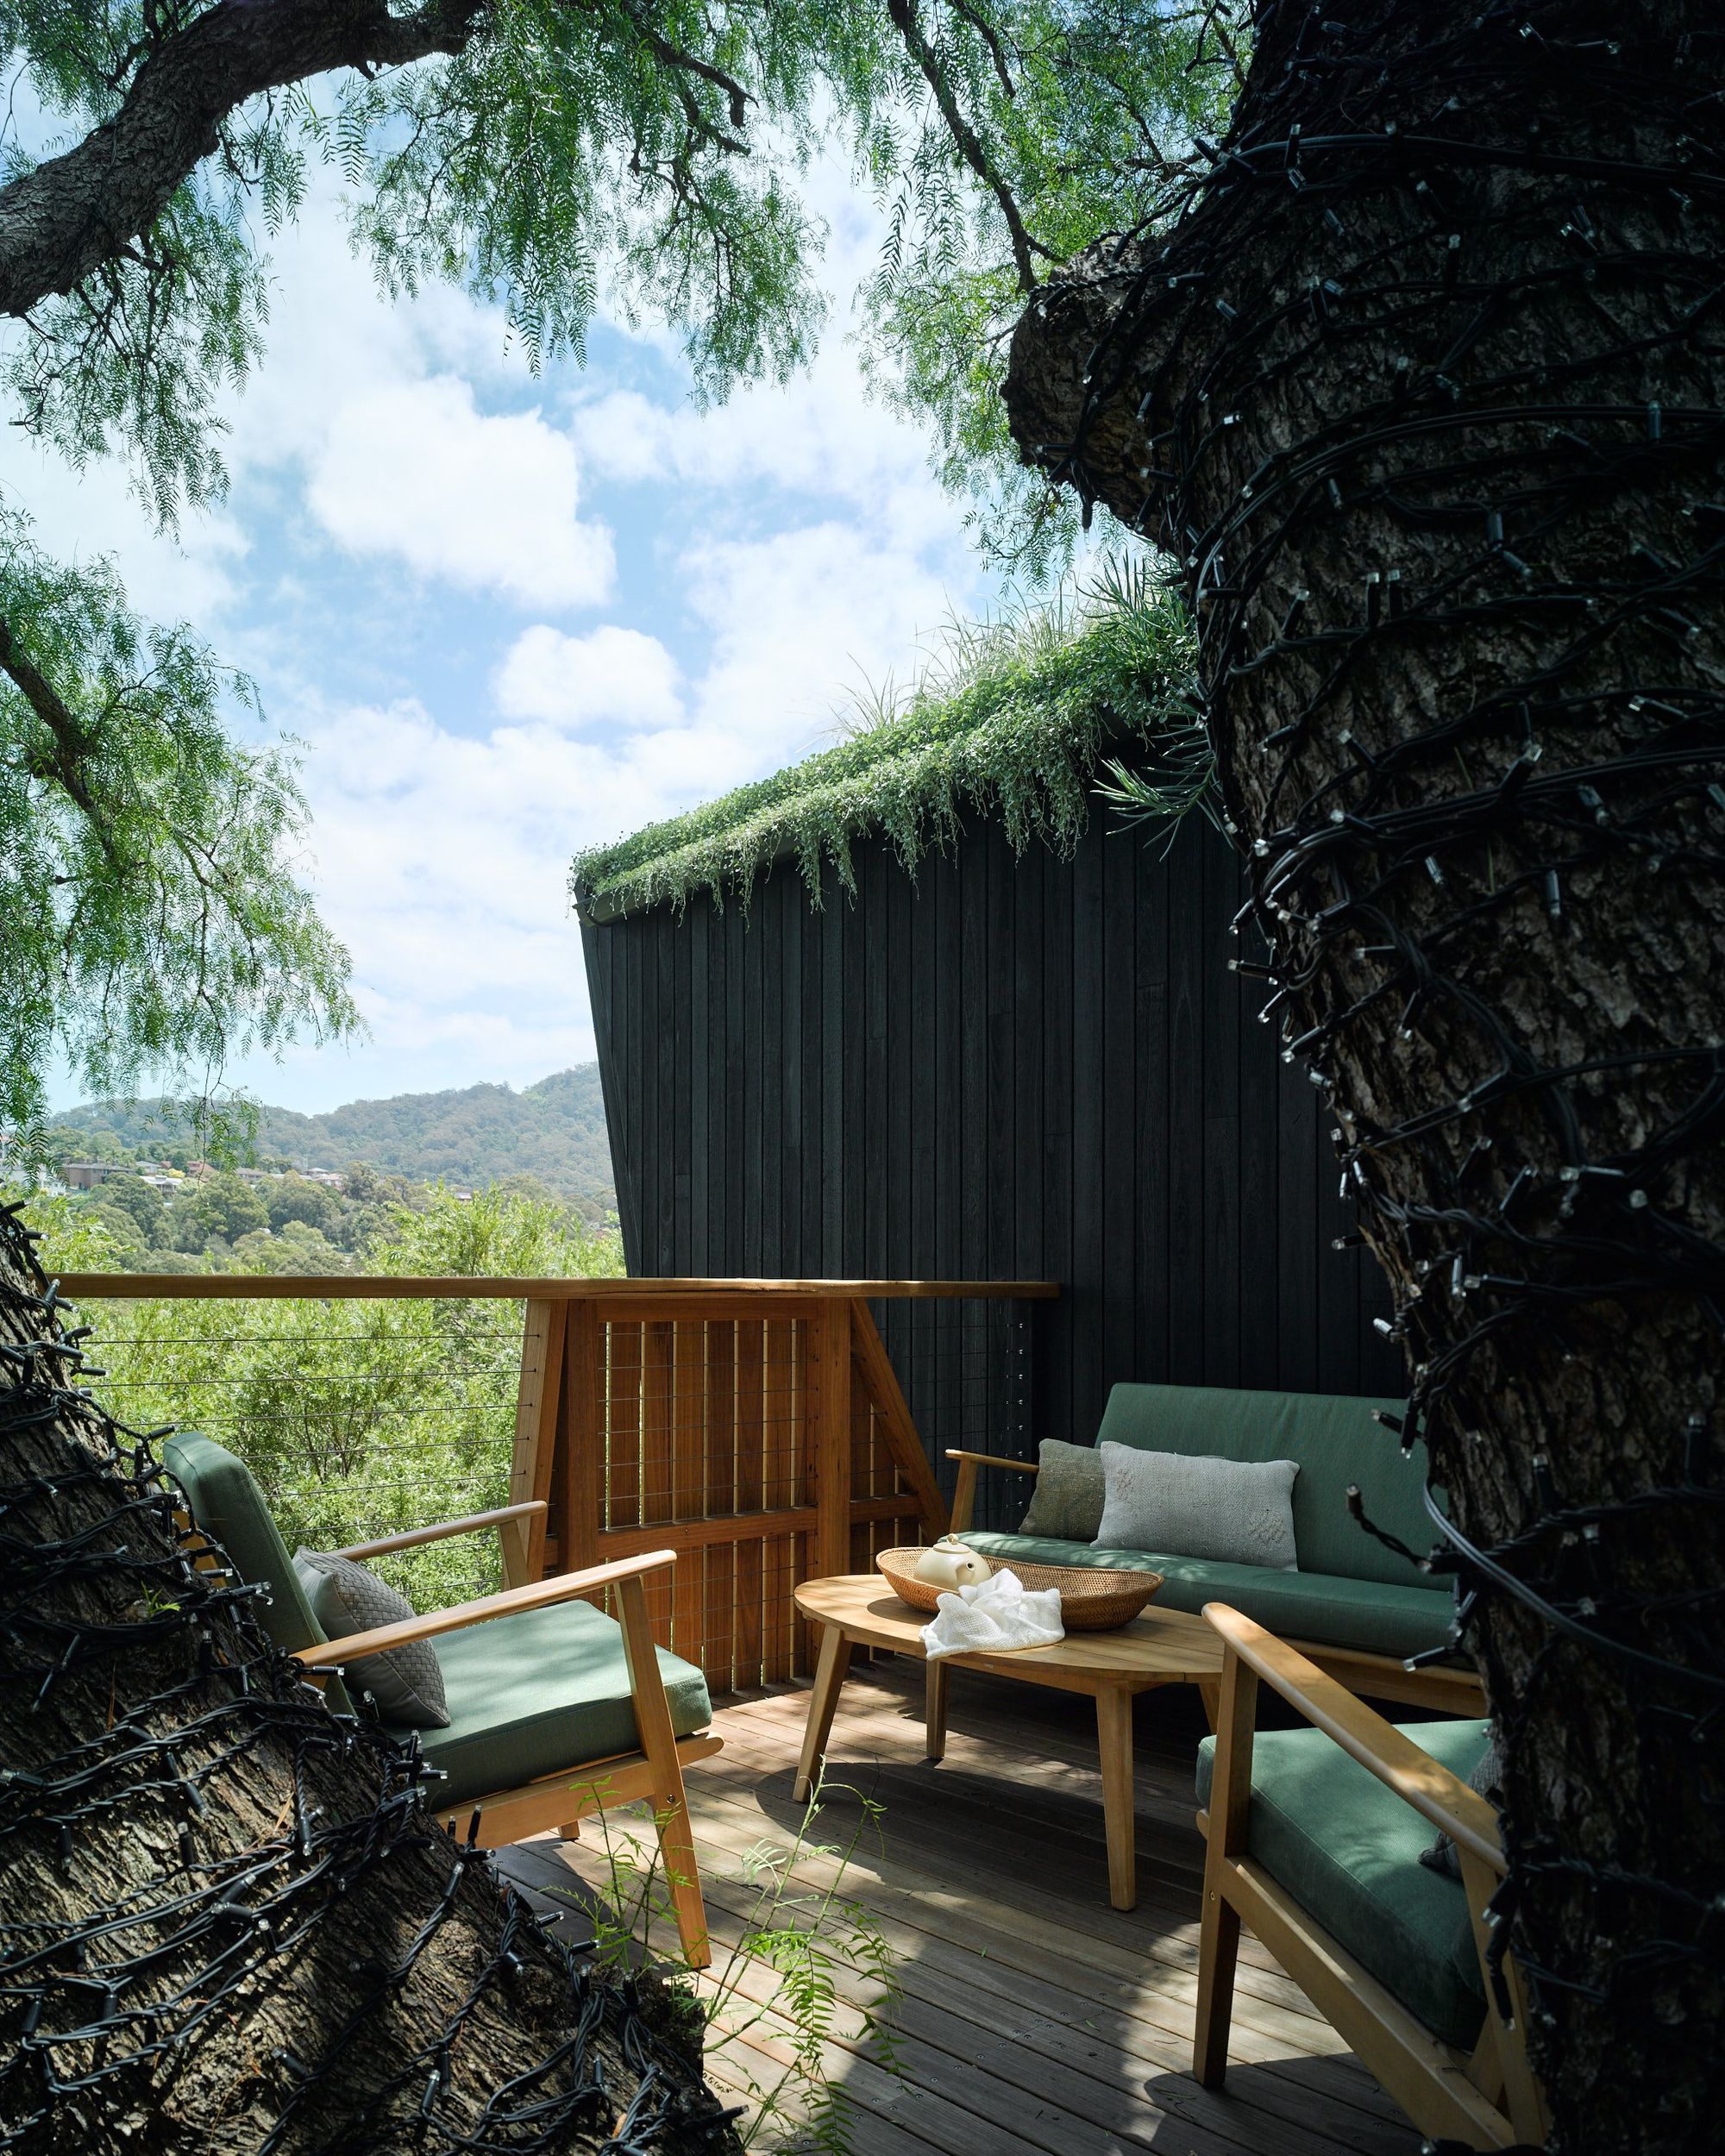 Pepper Tree Passive House by Alexander Symes Architect showing timber deck courtyard with outdoor furniture